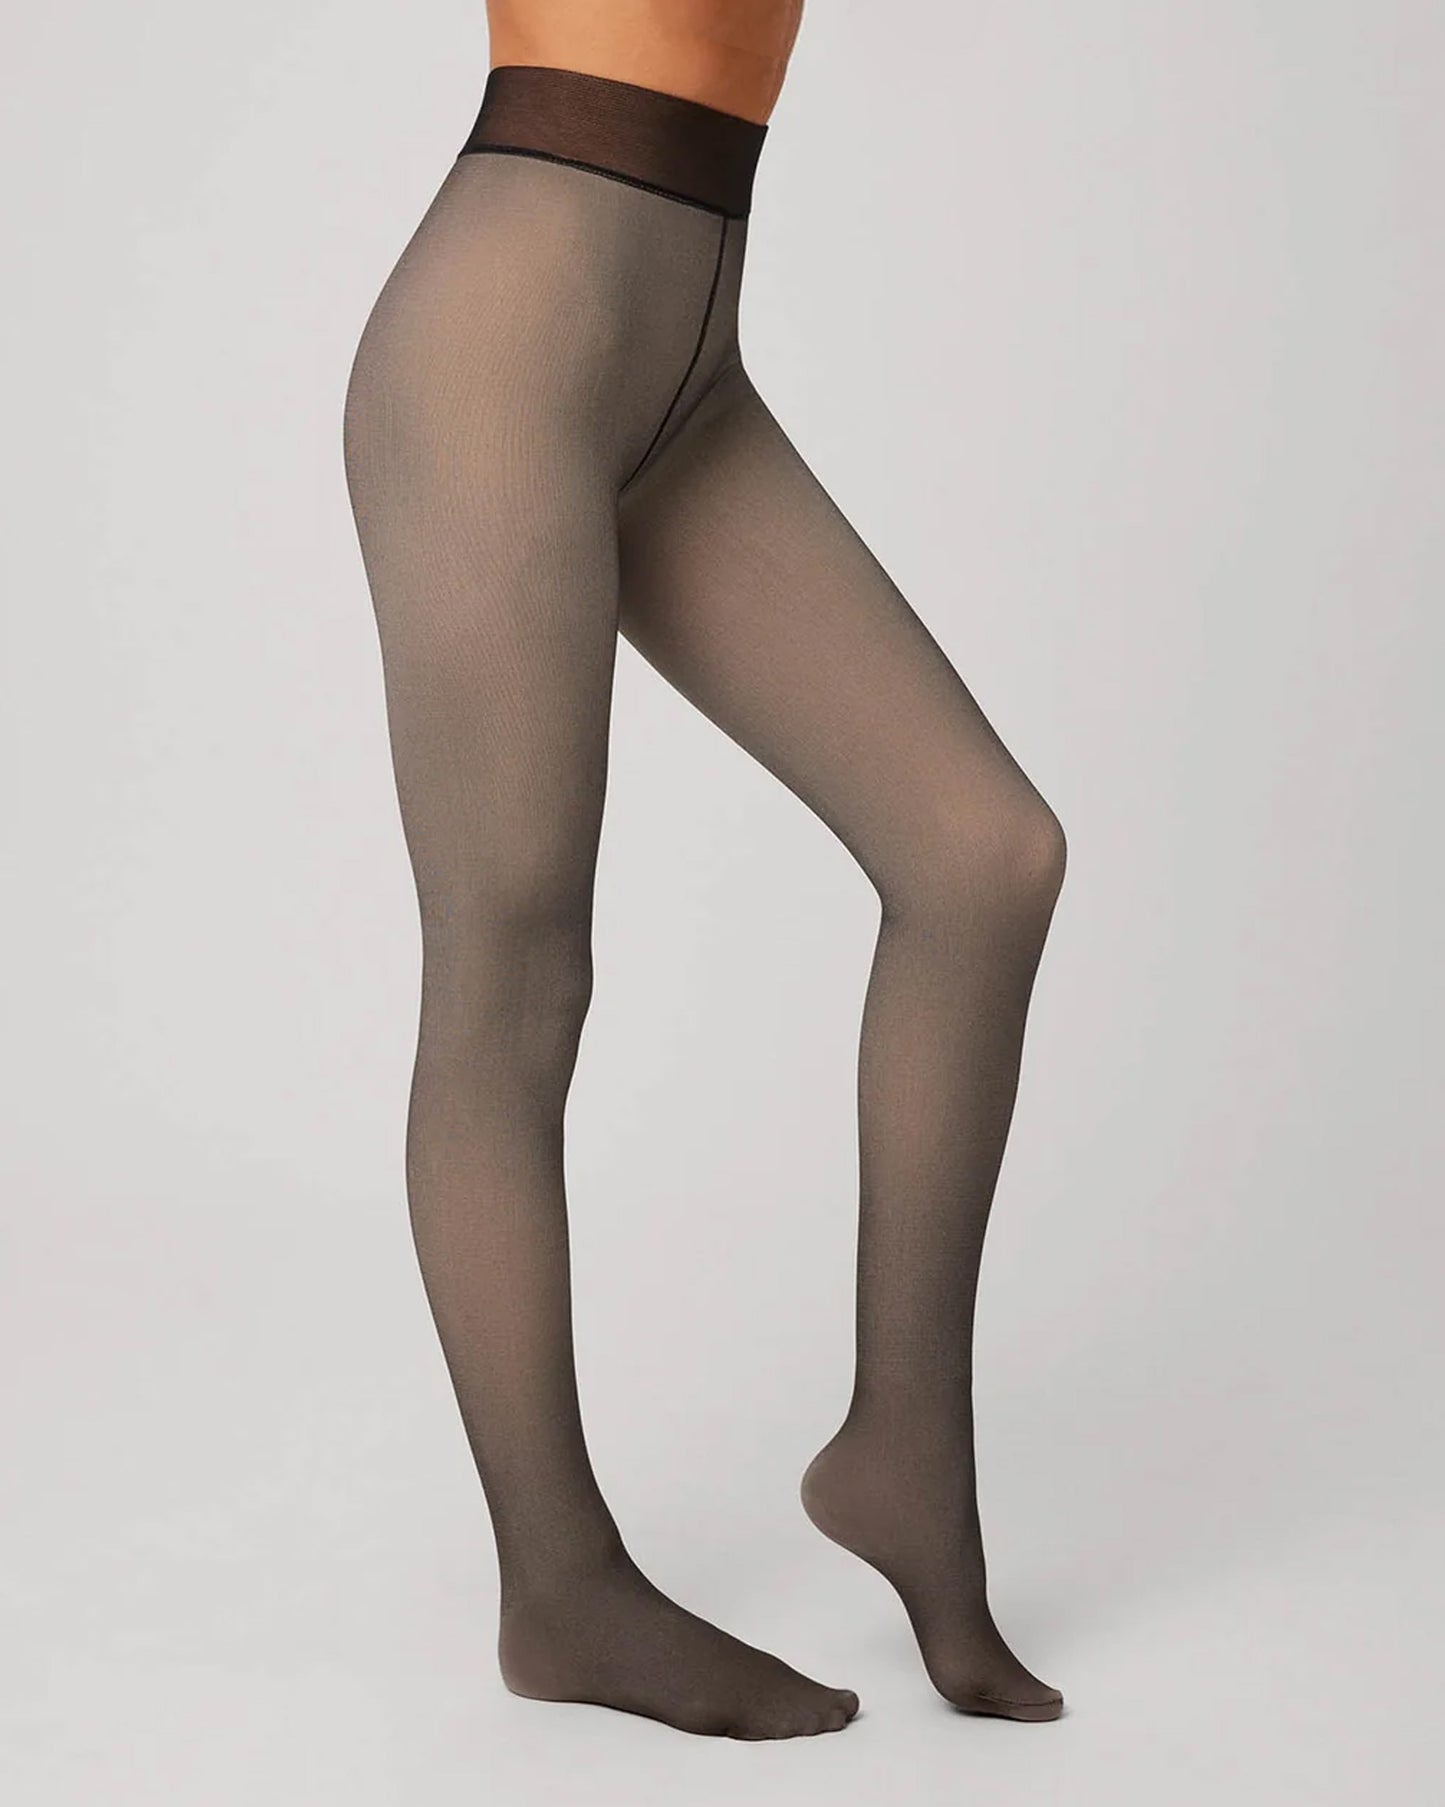 Ysabel Mora 16610 Thermal Tights - Warm thermal tights that have a sheer effect. Inside layer is nude colour with warm plush fleece lining, outer layer is sheer black and has a deep comfort waist band